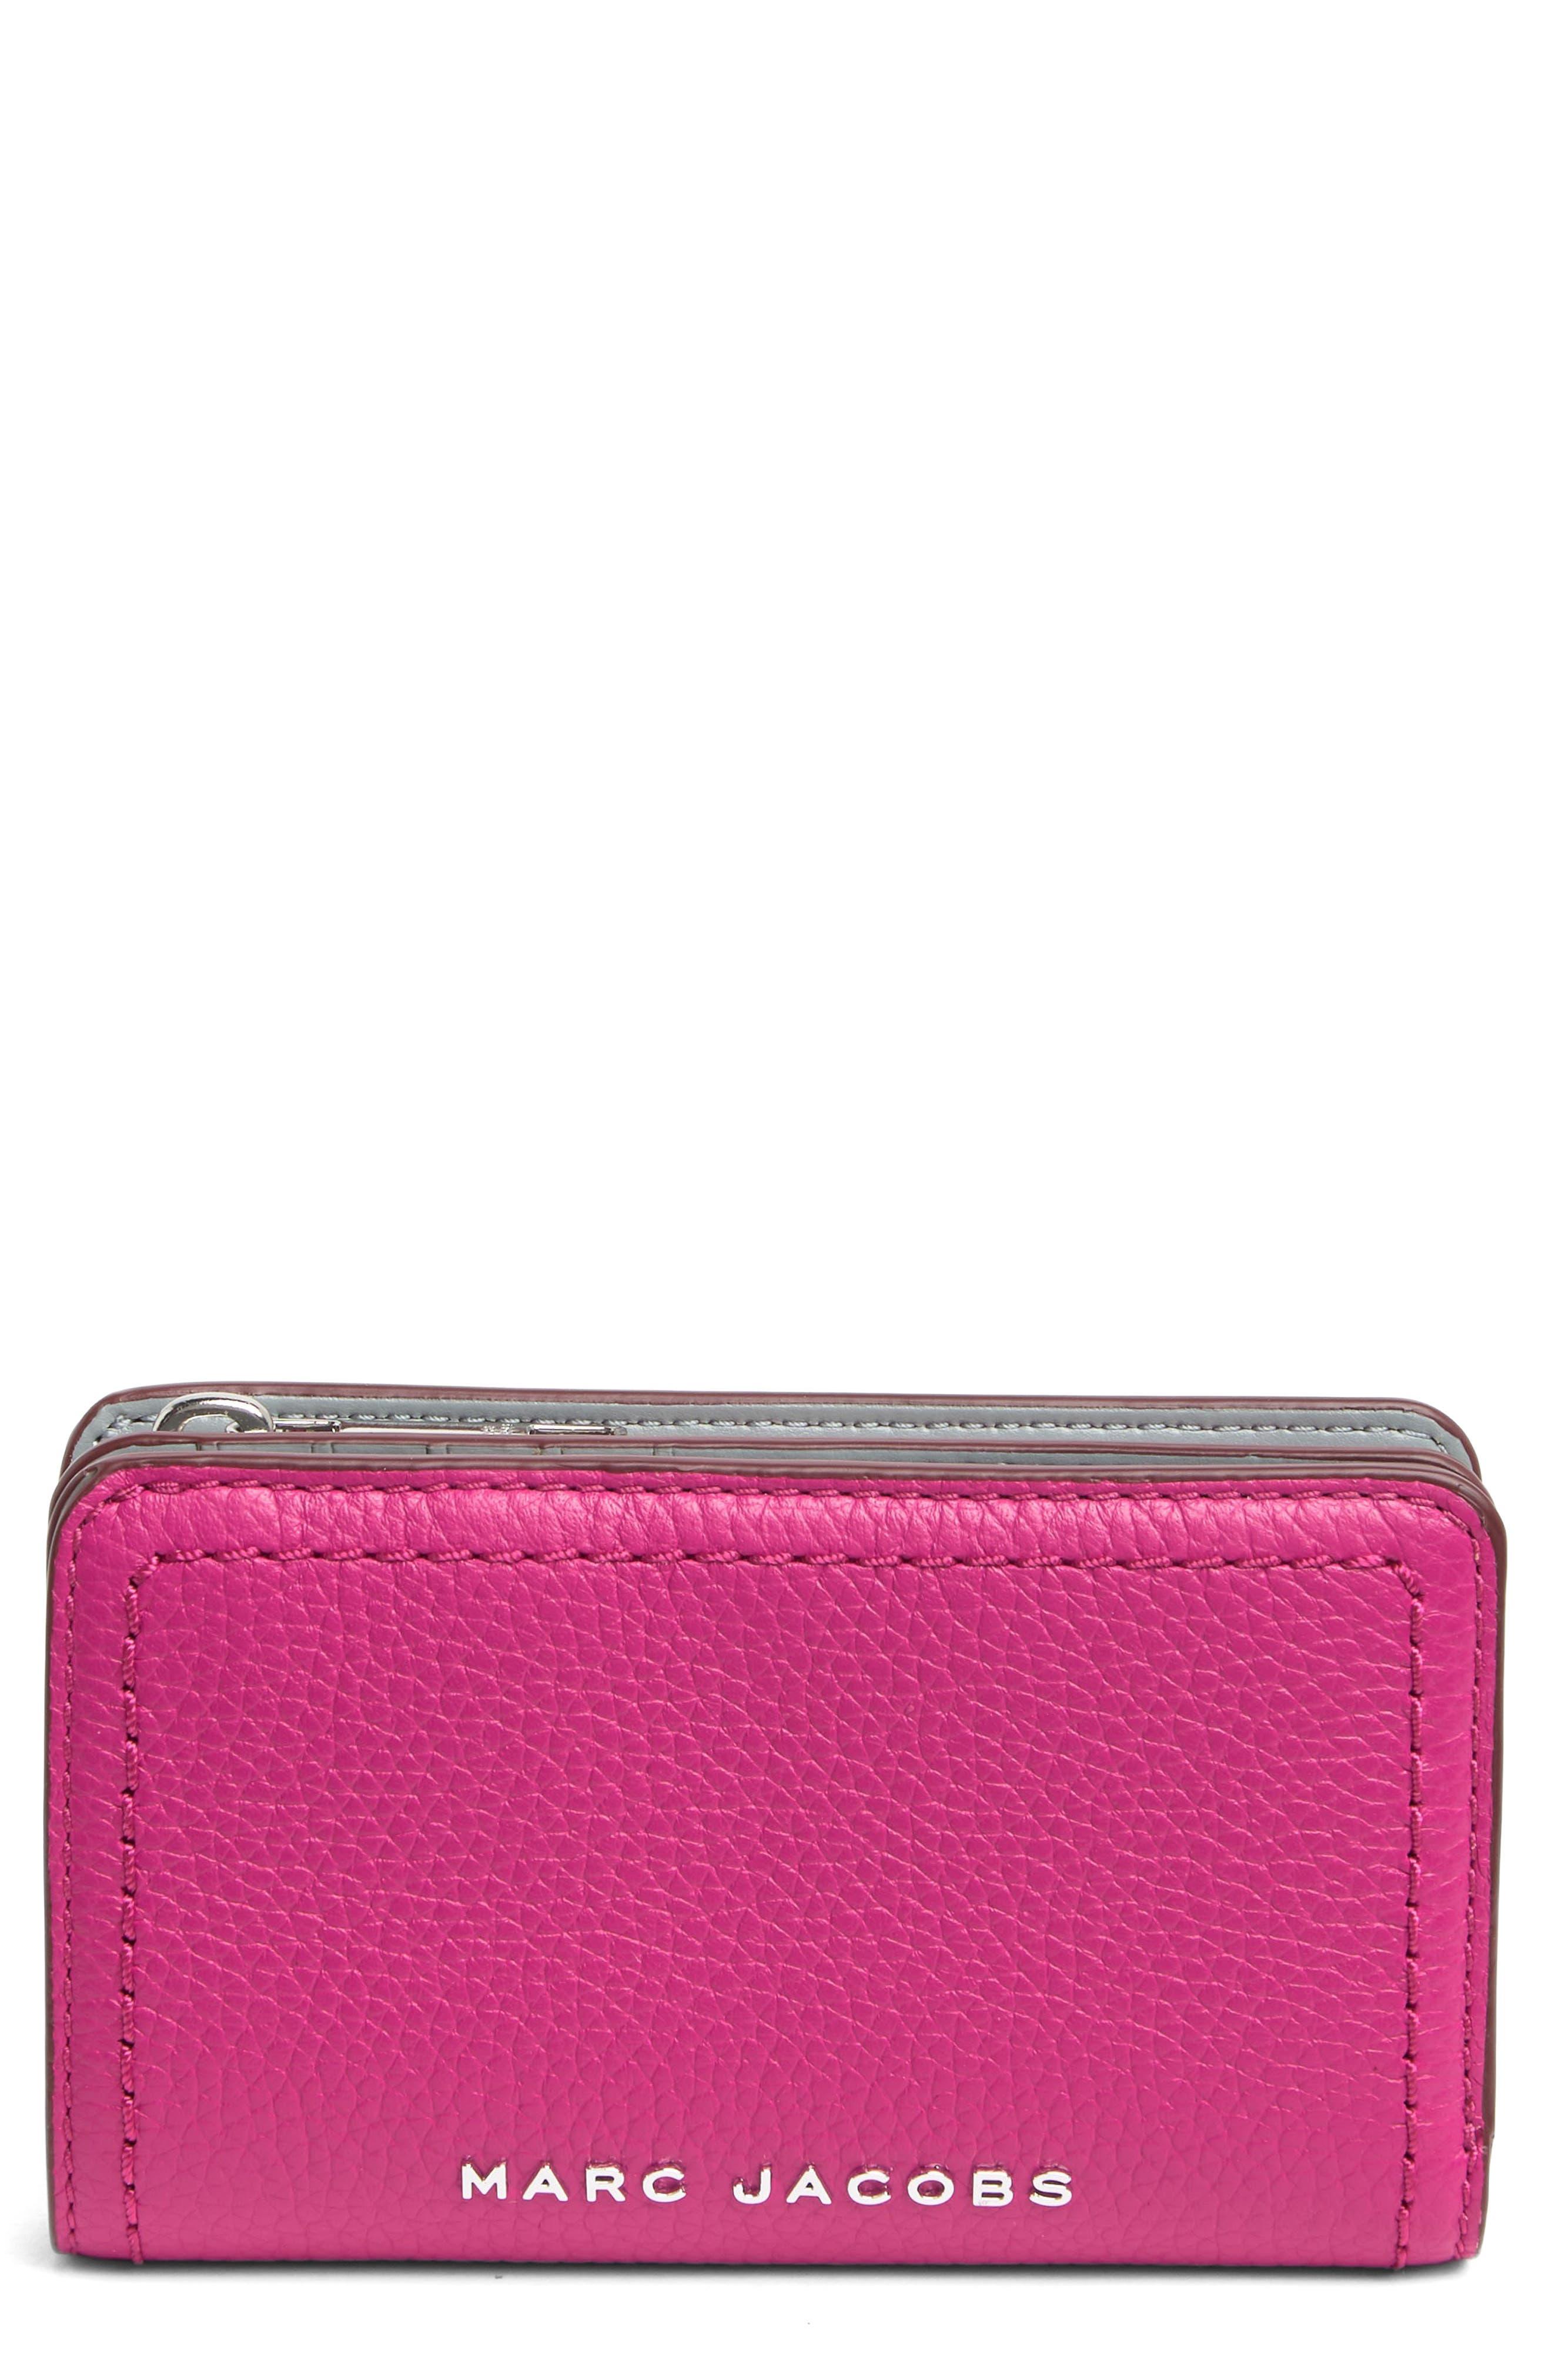 Marc Jacobs Topstitched Compact Zip Wallet in Purple | Lyst